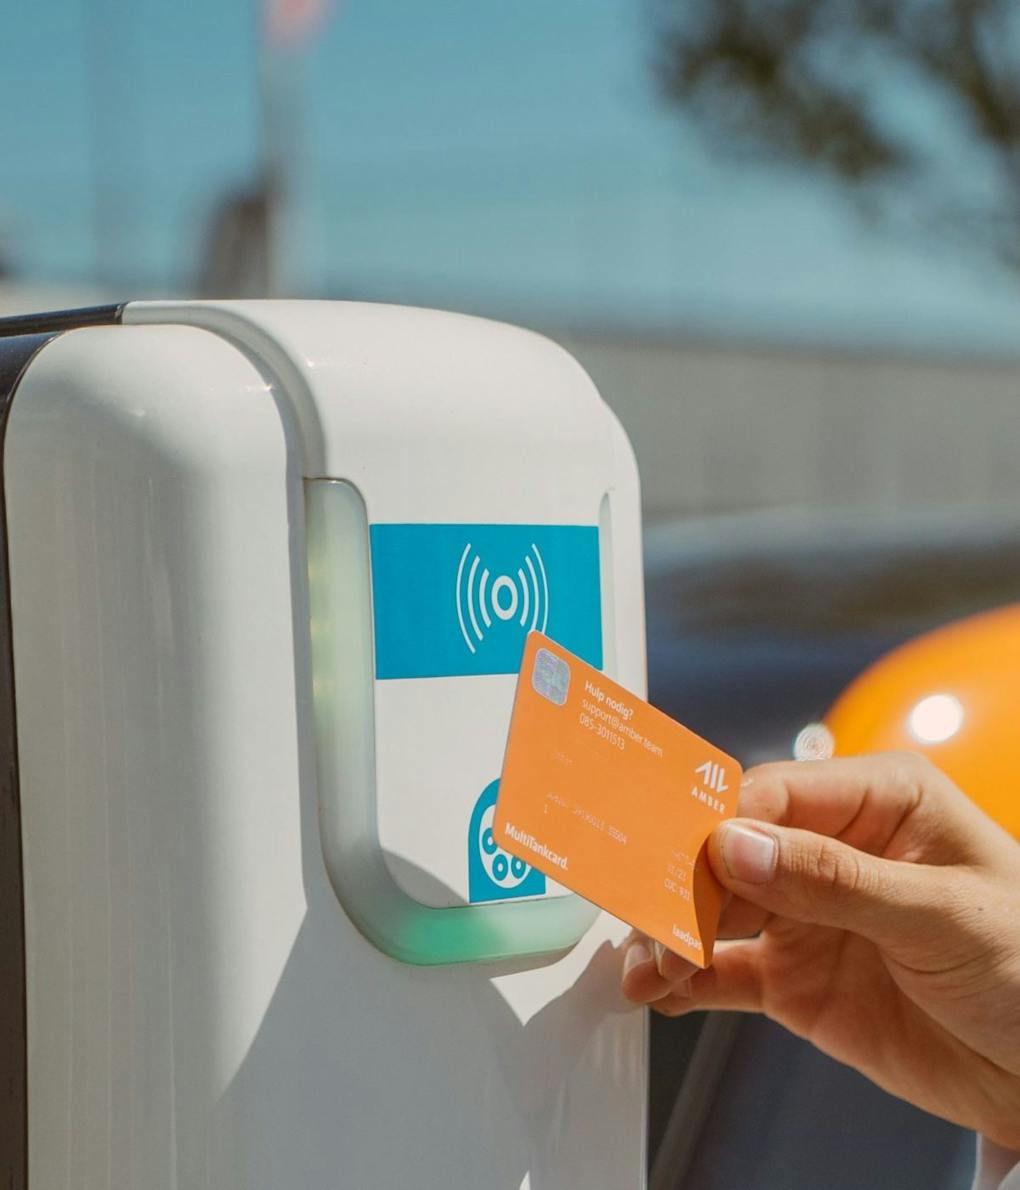 Hand tapping an RFID EV Charge Card against a charging point